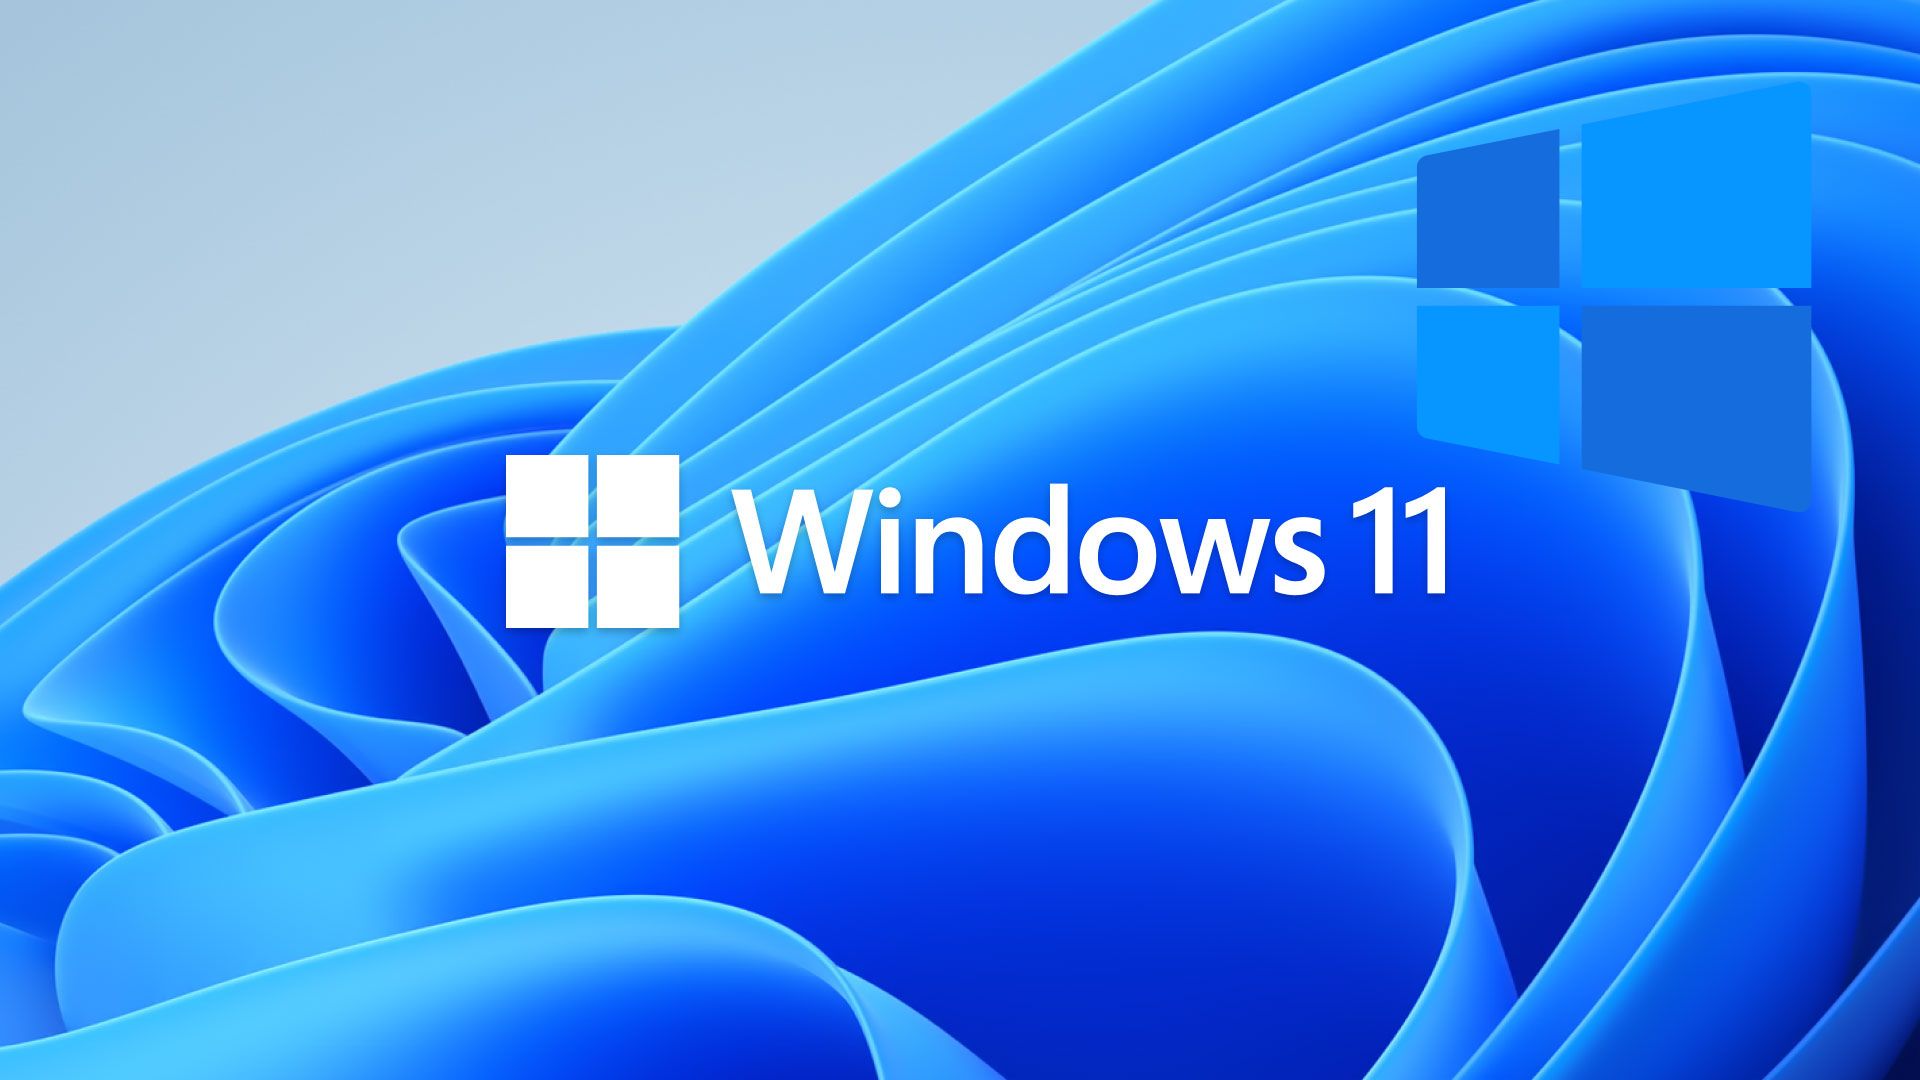 What you should know about Windows 11